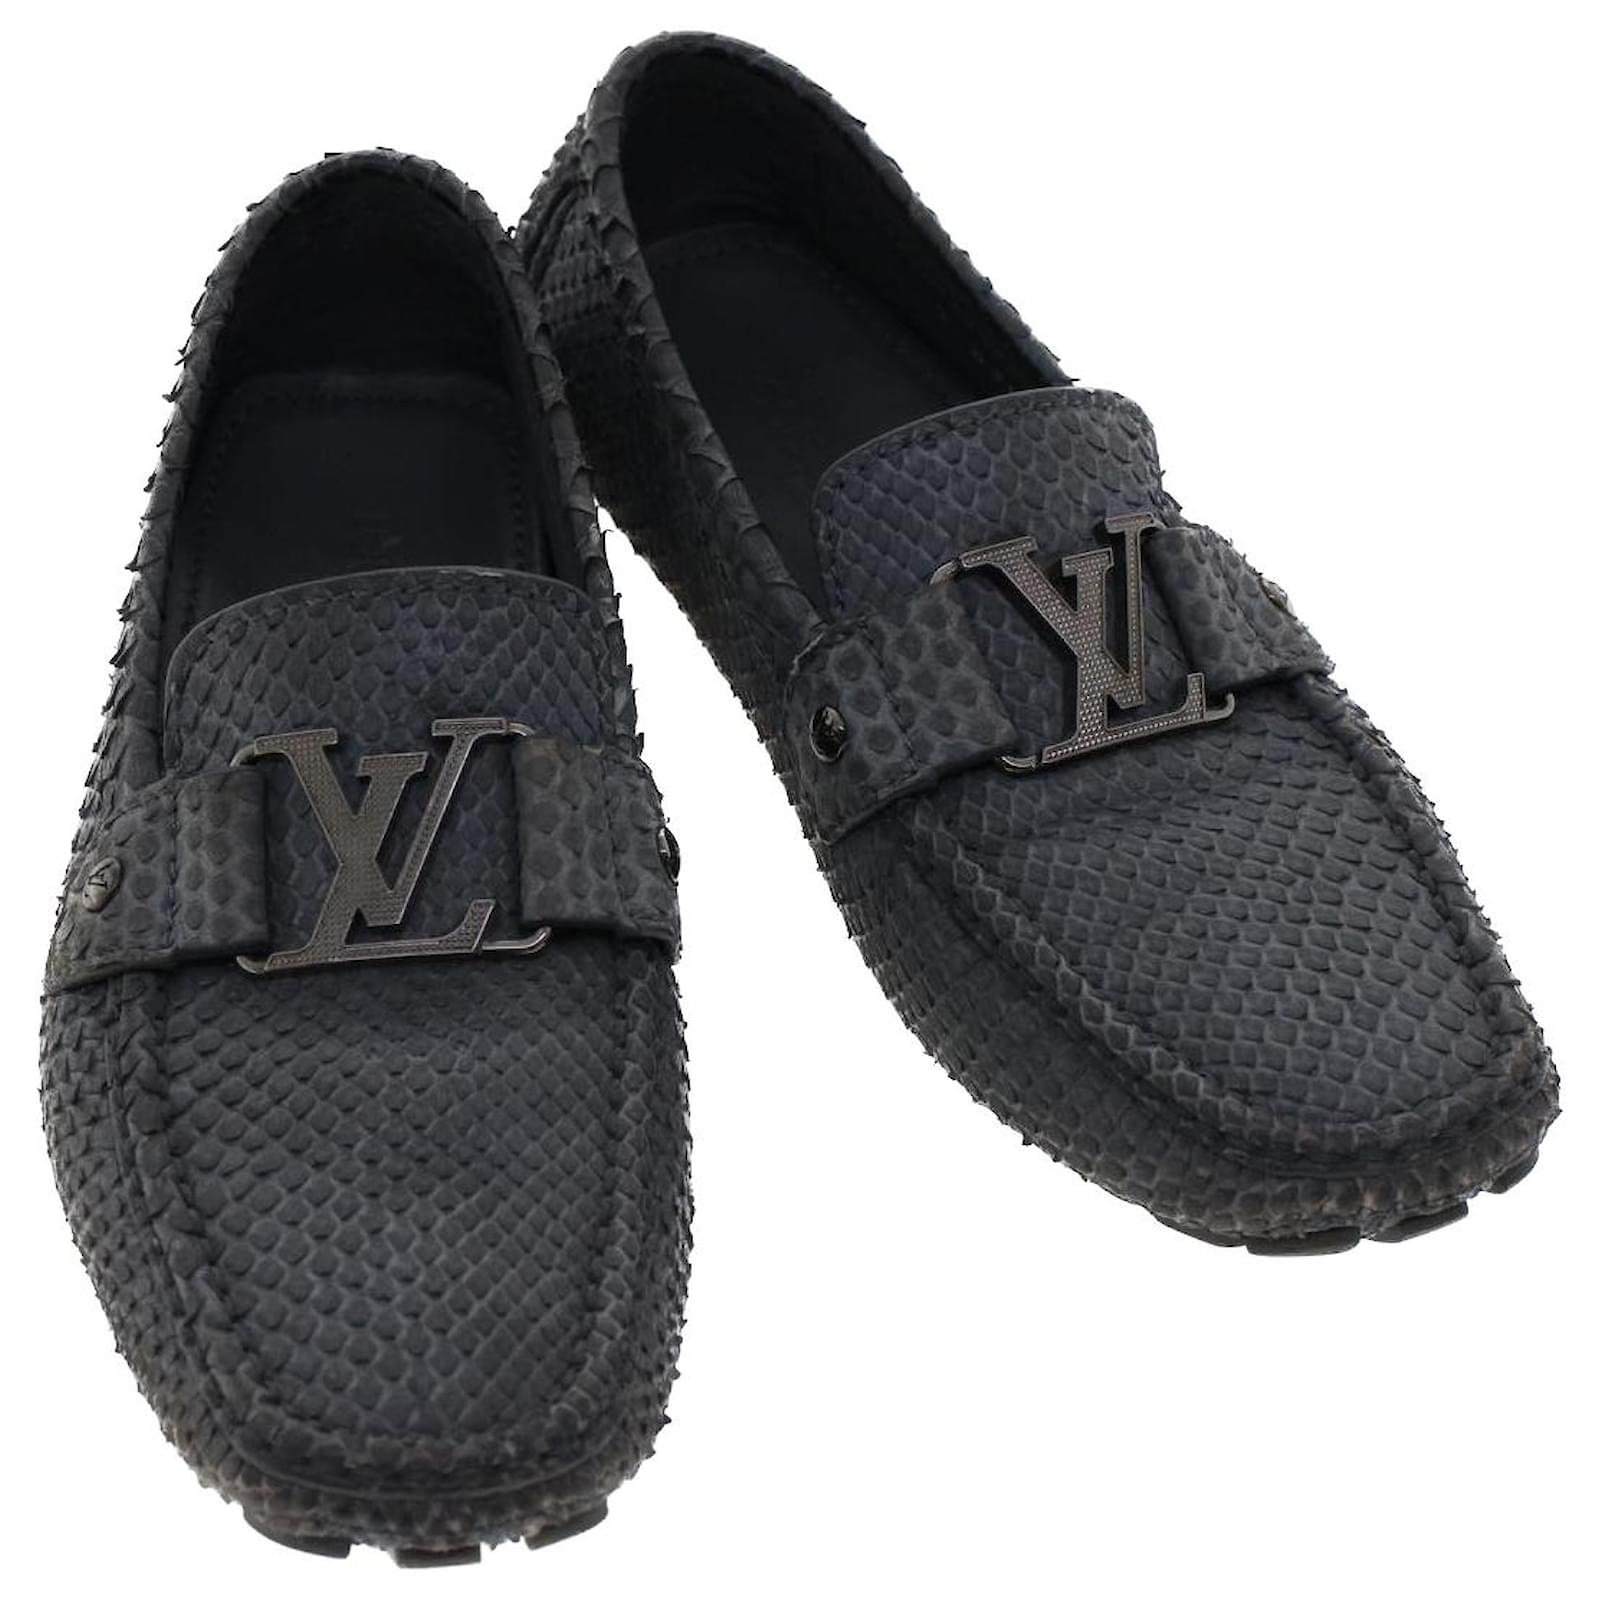 LOUIS VUITTON Driving Shoes Exotic Leather 7 Black Gray LV Auth